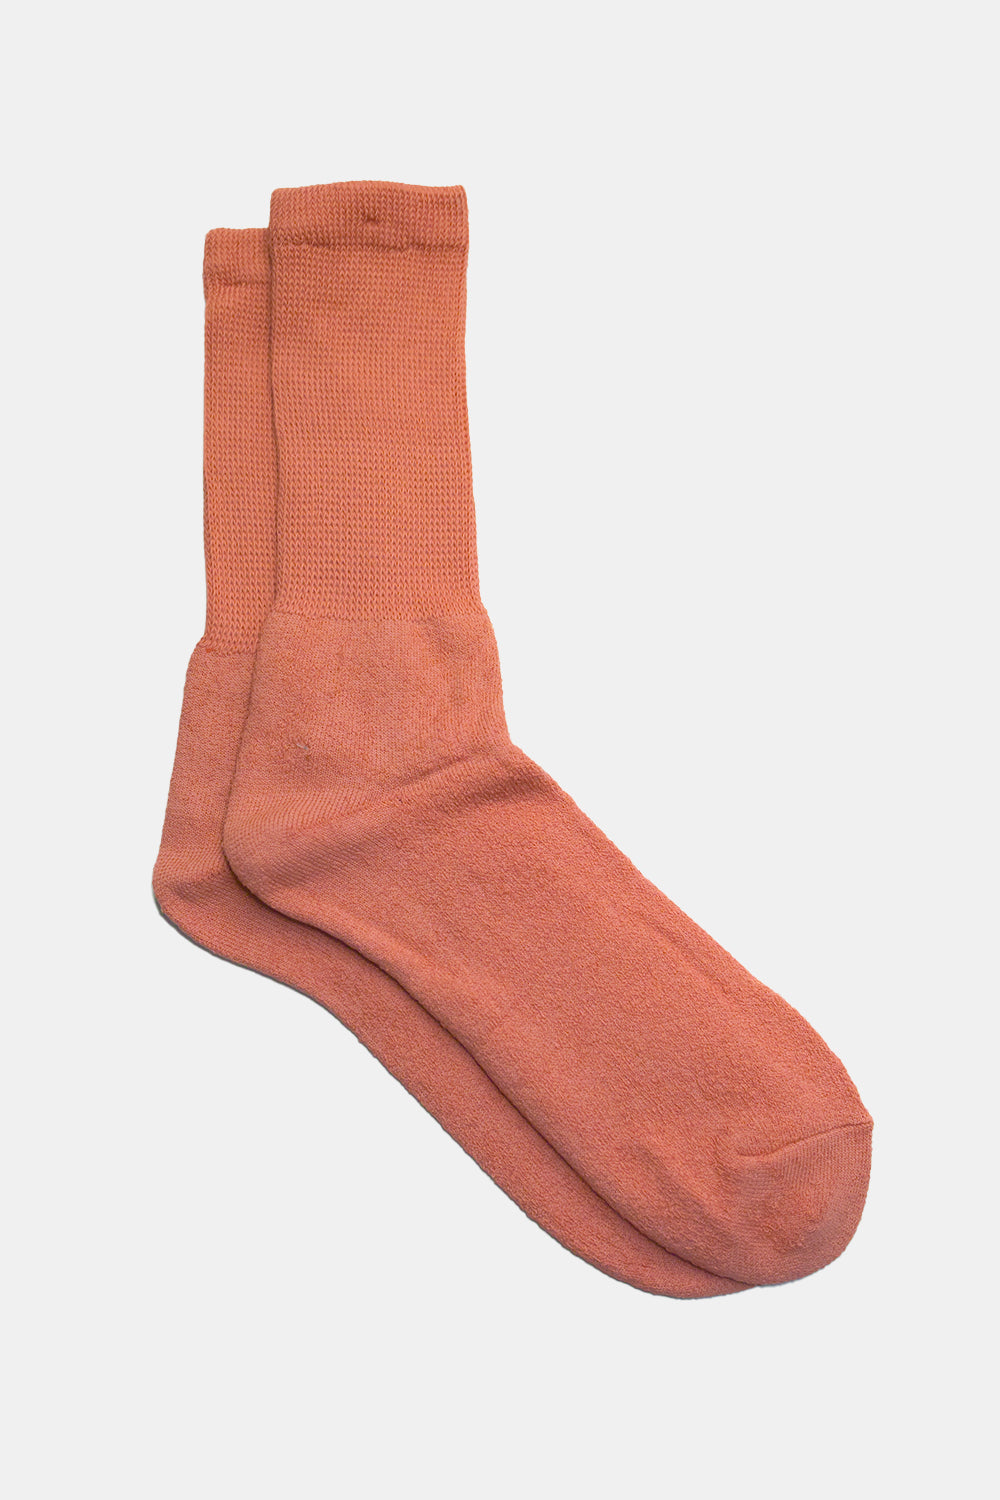 Anonymous Ism OC Supersoft Crew Socks (Soft Pink)
